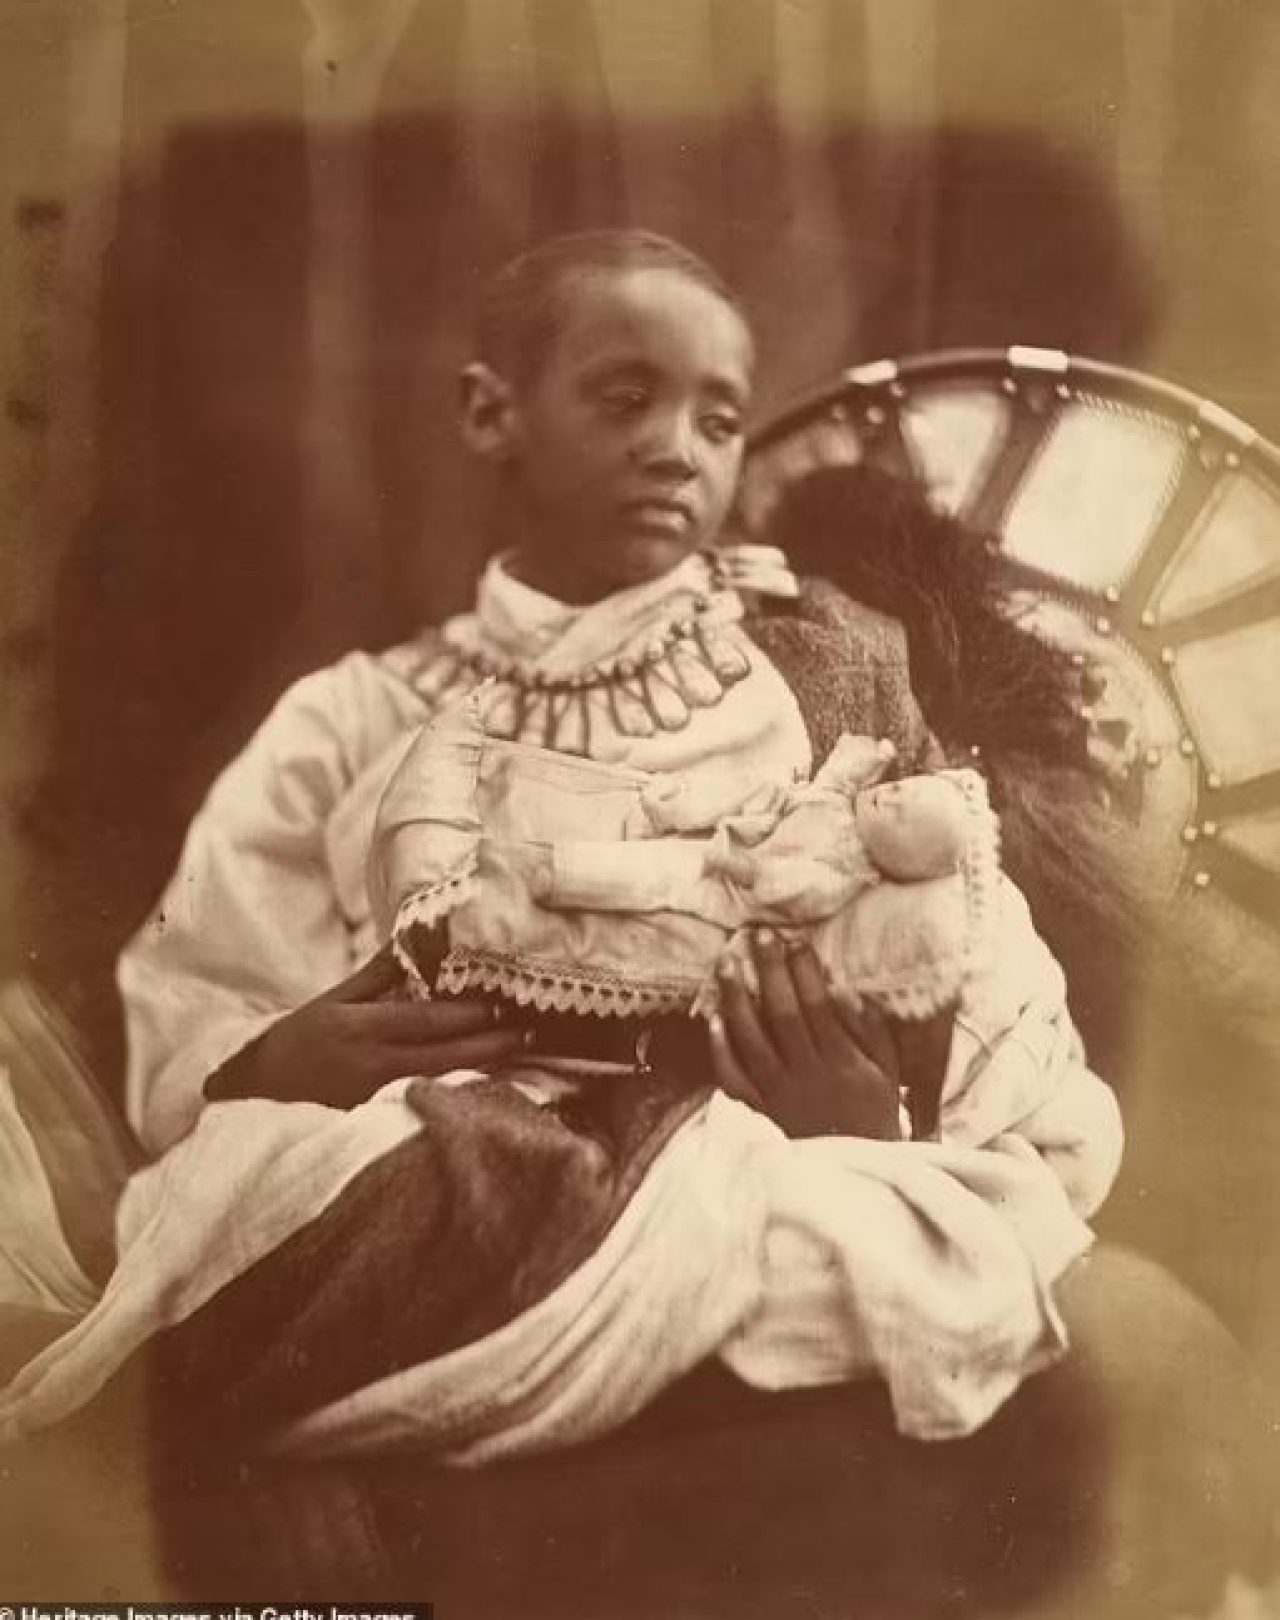 Buckingham Palace declines to return remains of Ethiopian prince. Afro News Wire